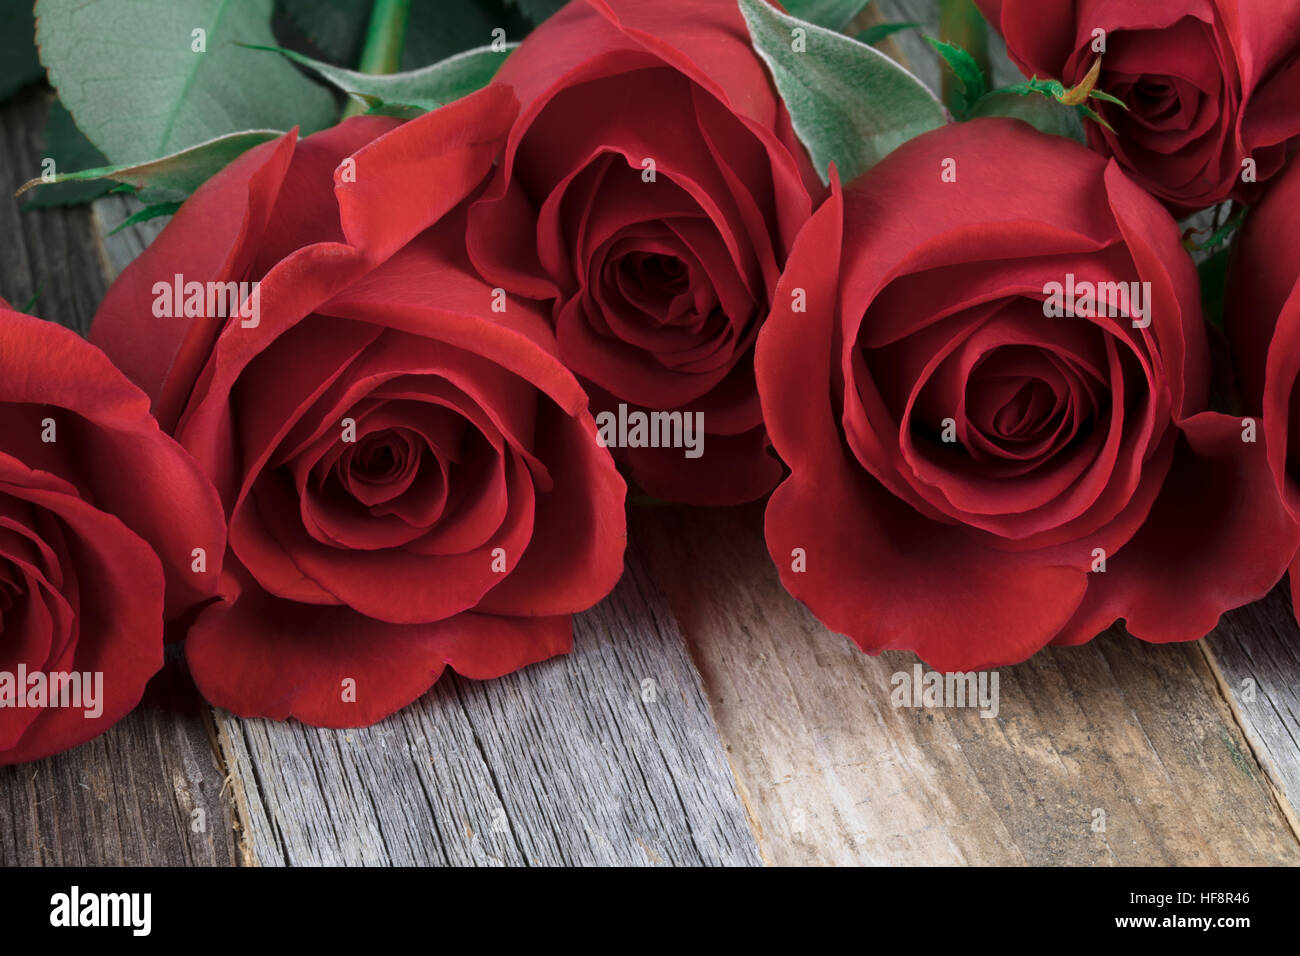 Close up of red roses on wooden table. Stock Photo